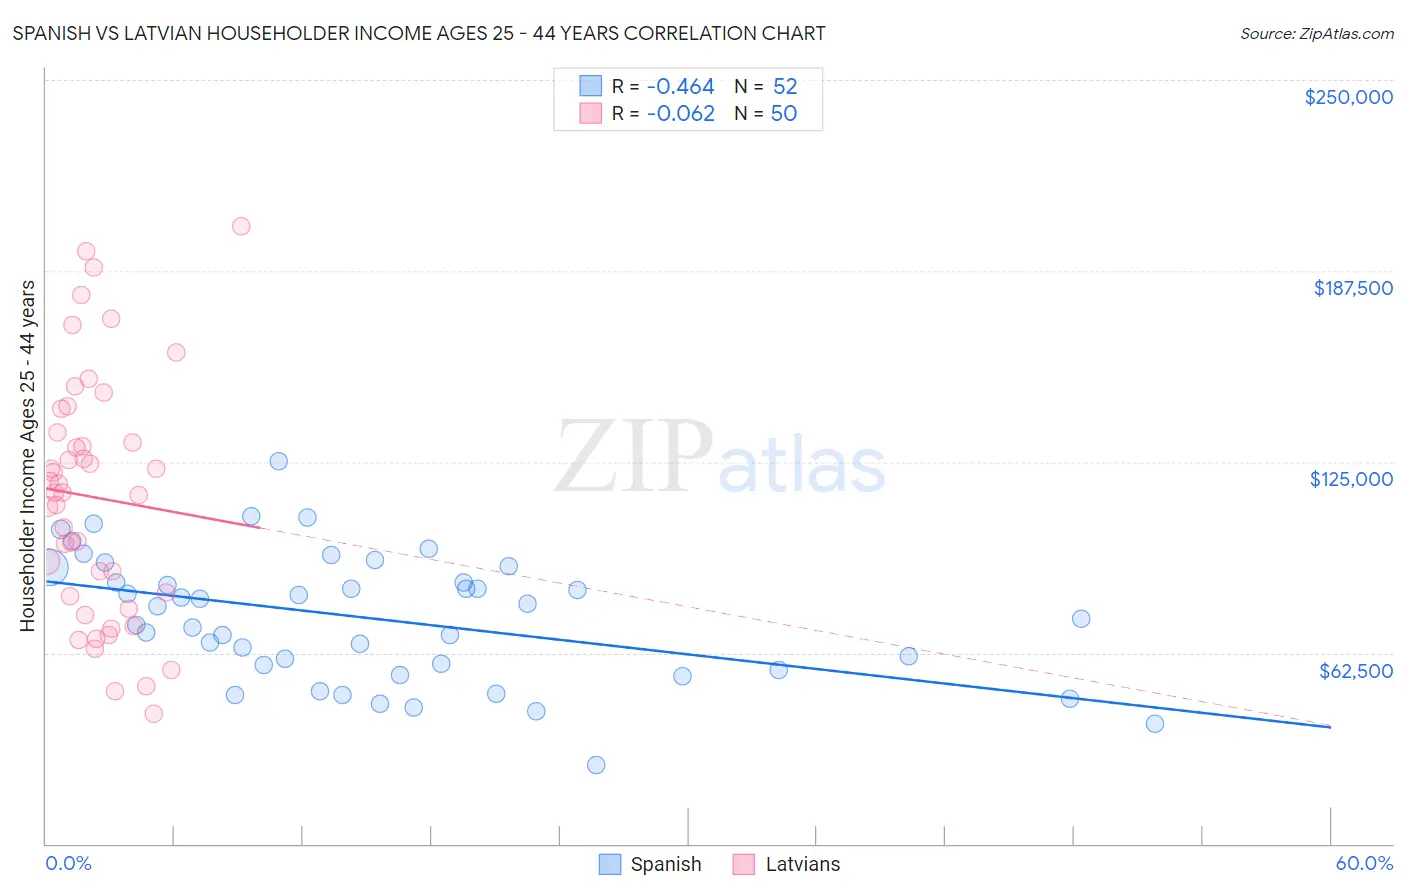 Spanish vs Latvian Householder Income Ages 25 - 44 years